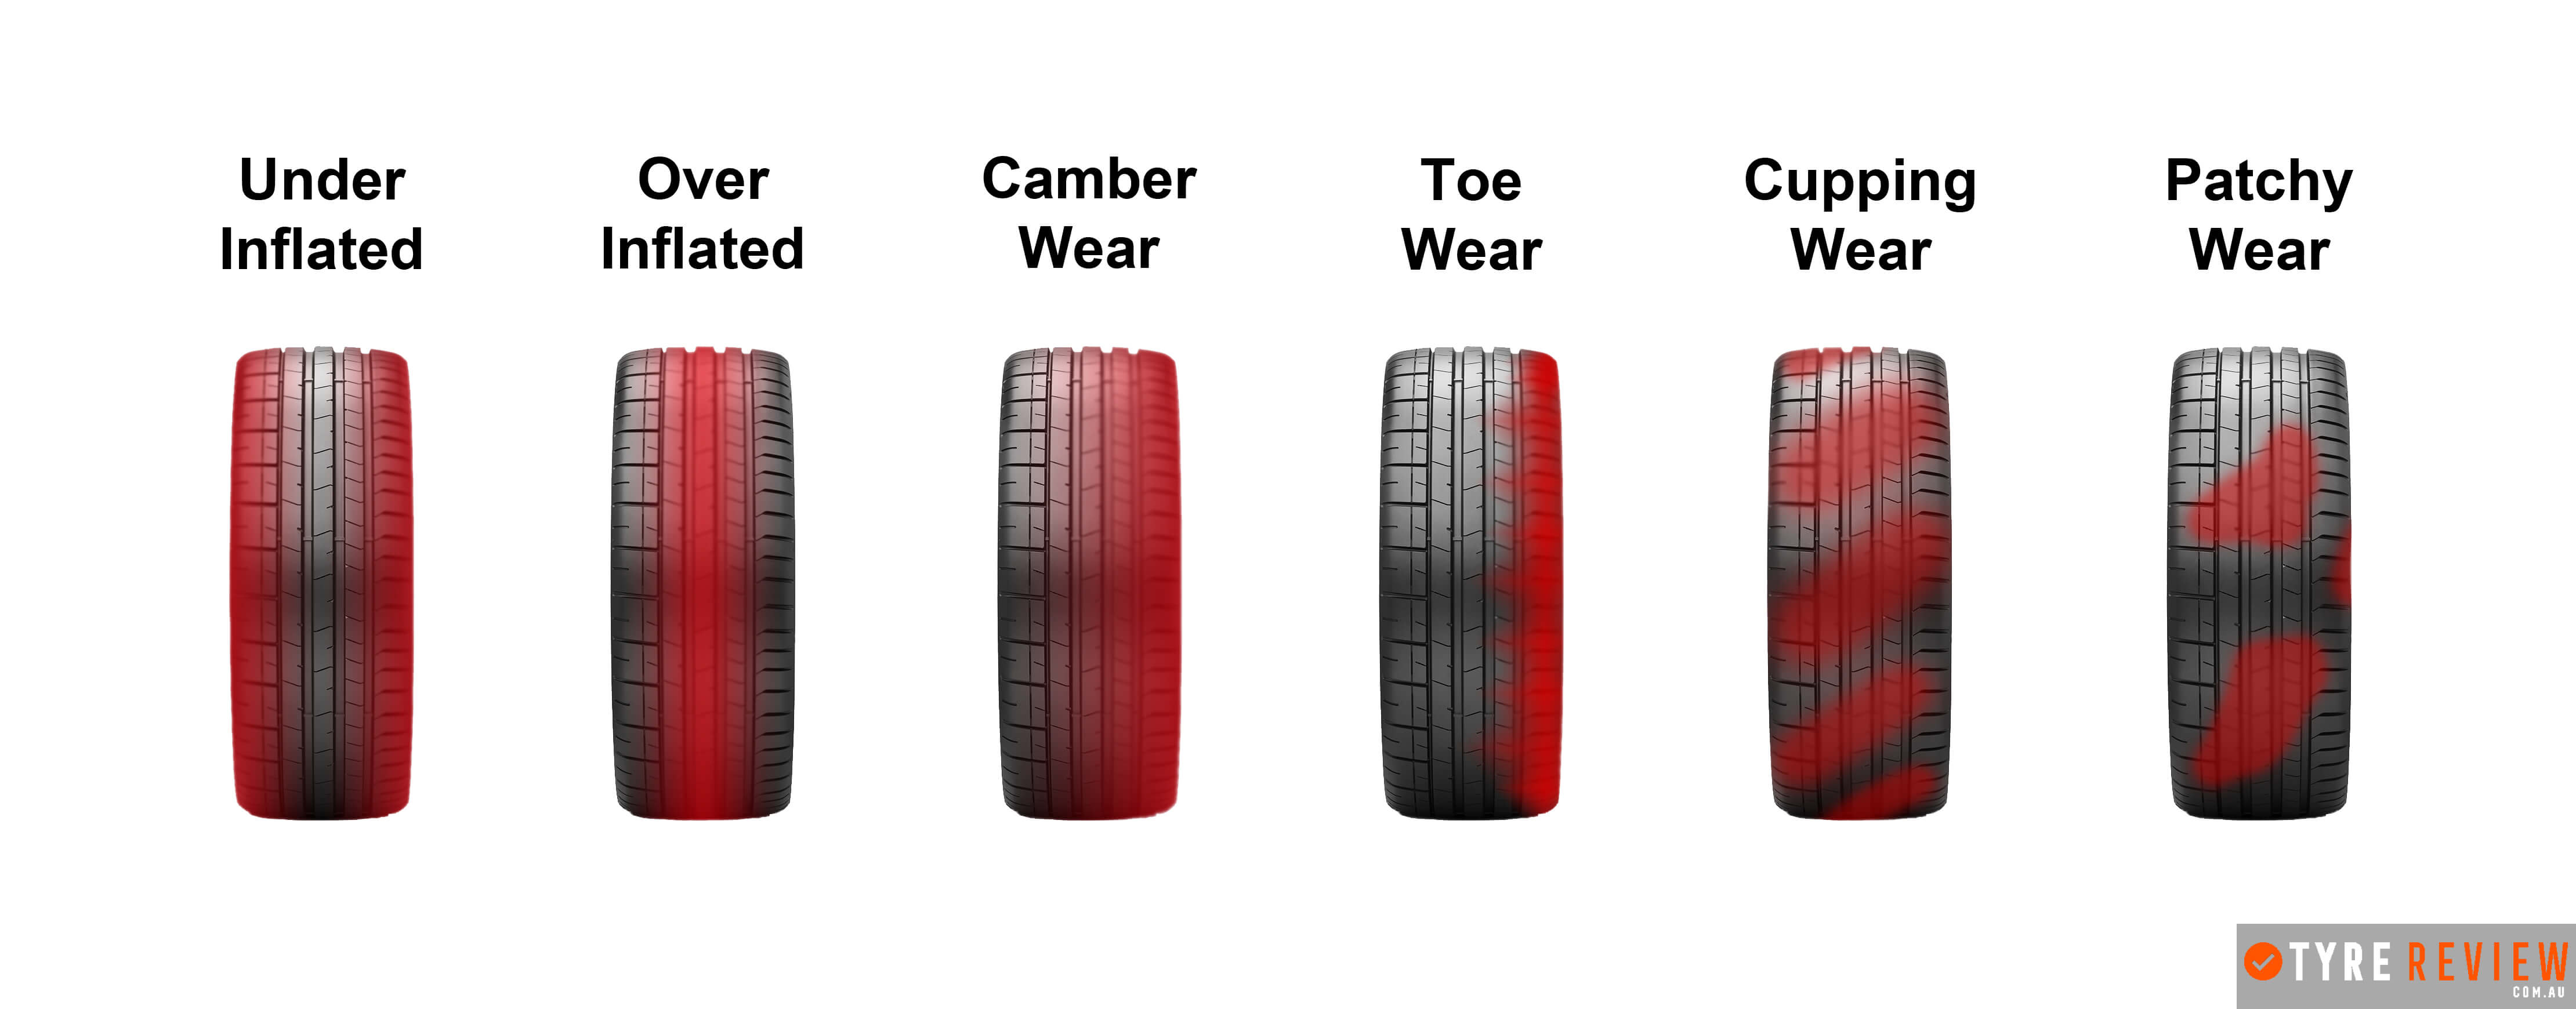 Different issues affect tyre wear differently